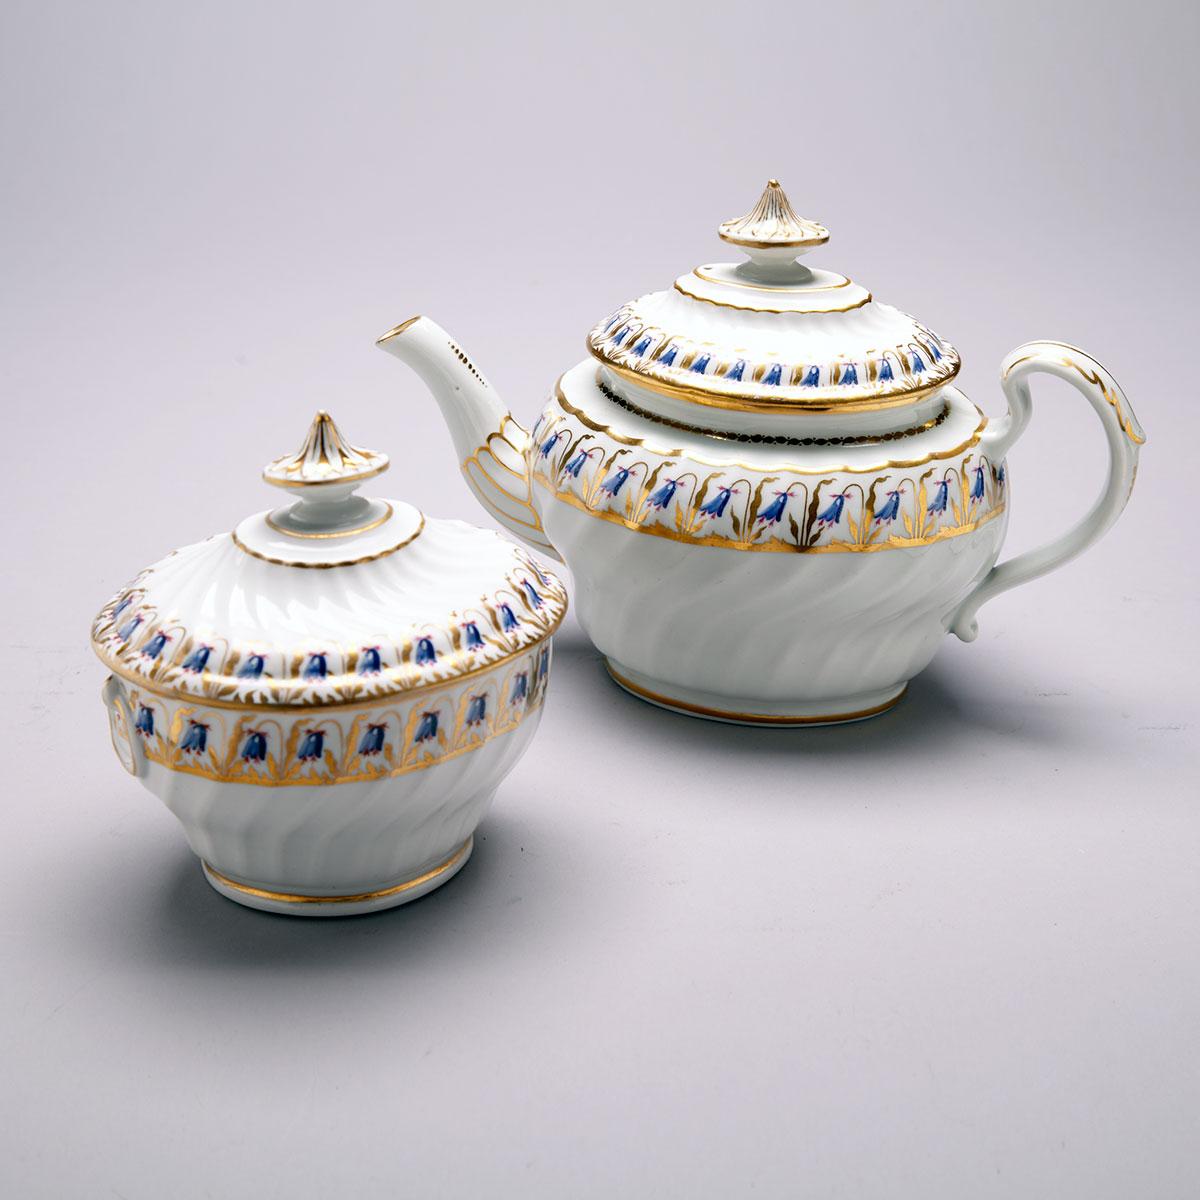 Worcester Teapot and Covered Sugar Basin, c.1790-95